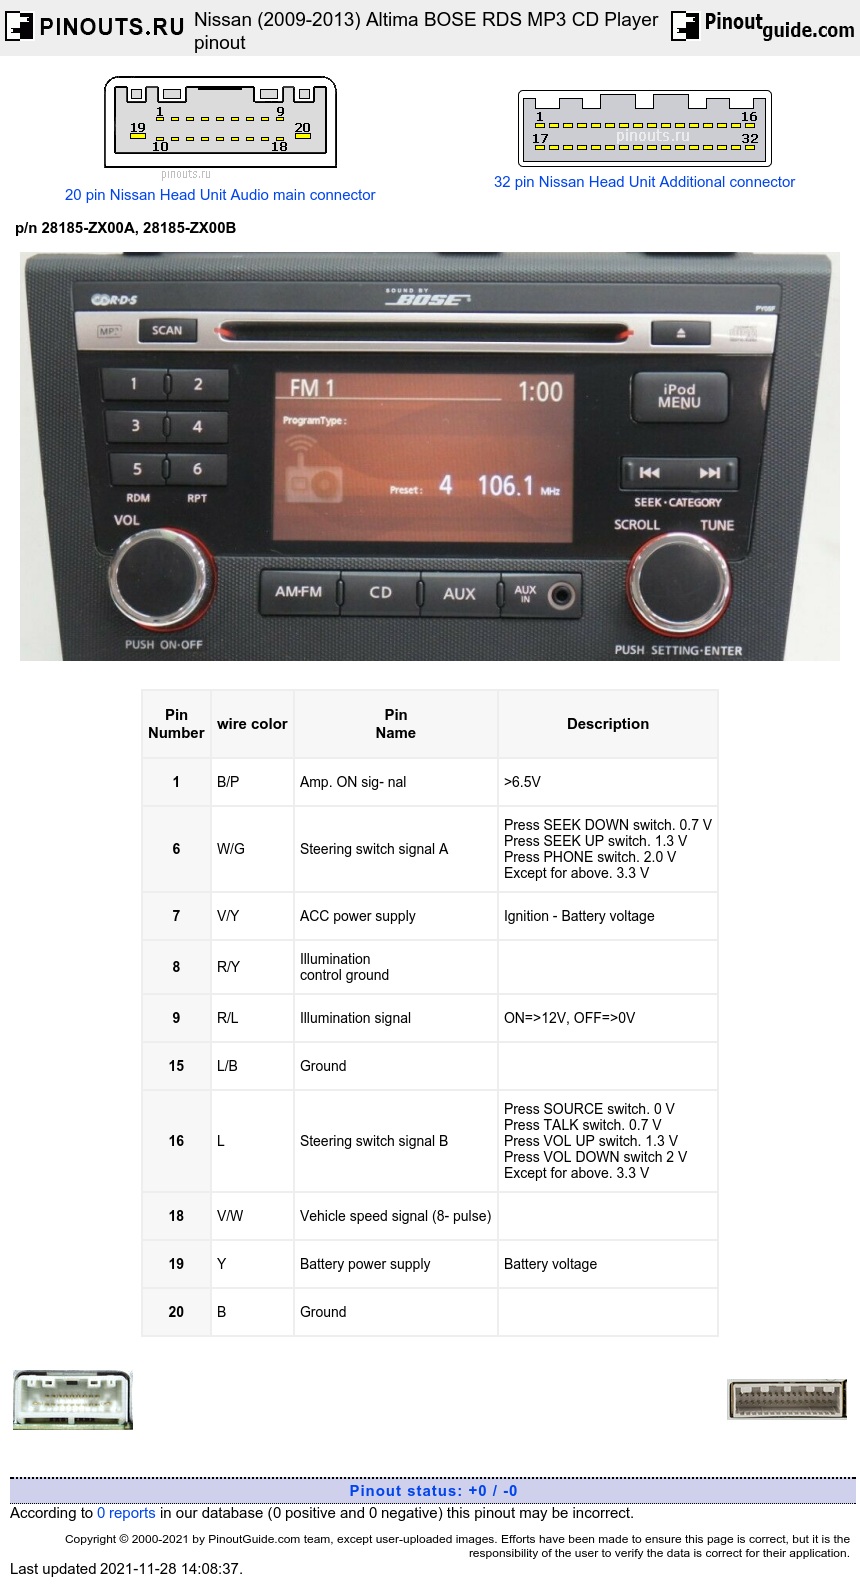 Nissan (2009-2013) Altima BOSE RDS MP3 CD Player diagram